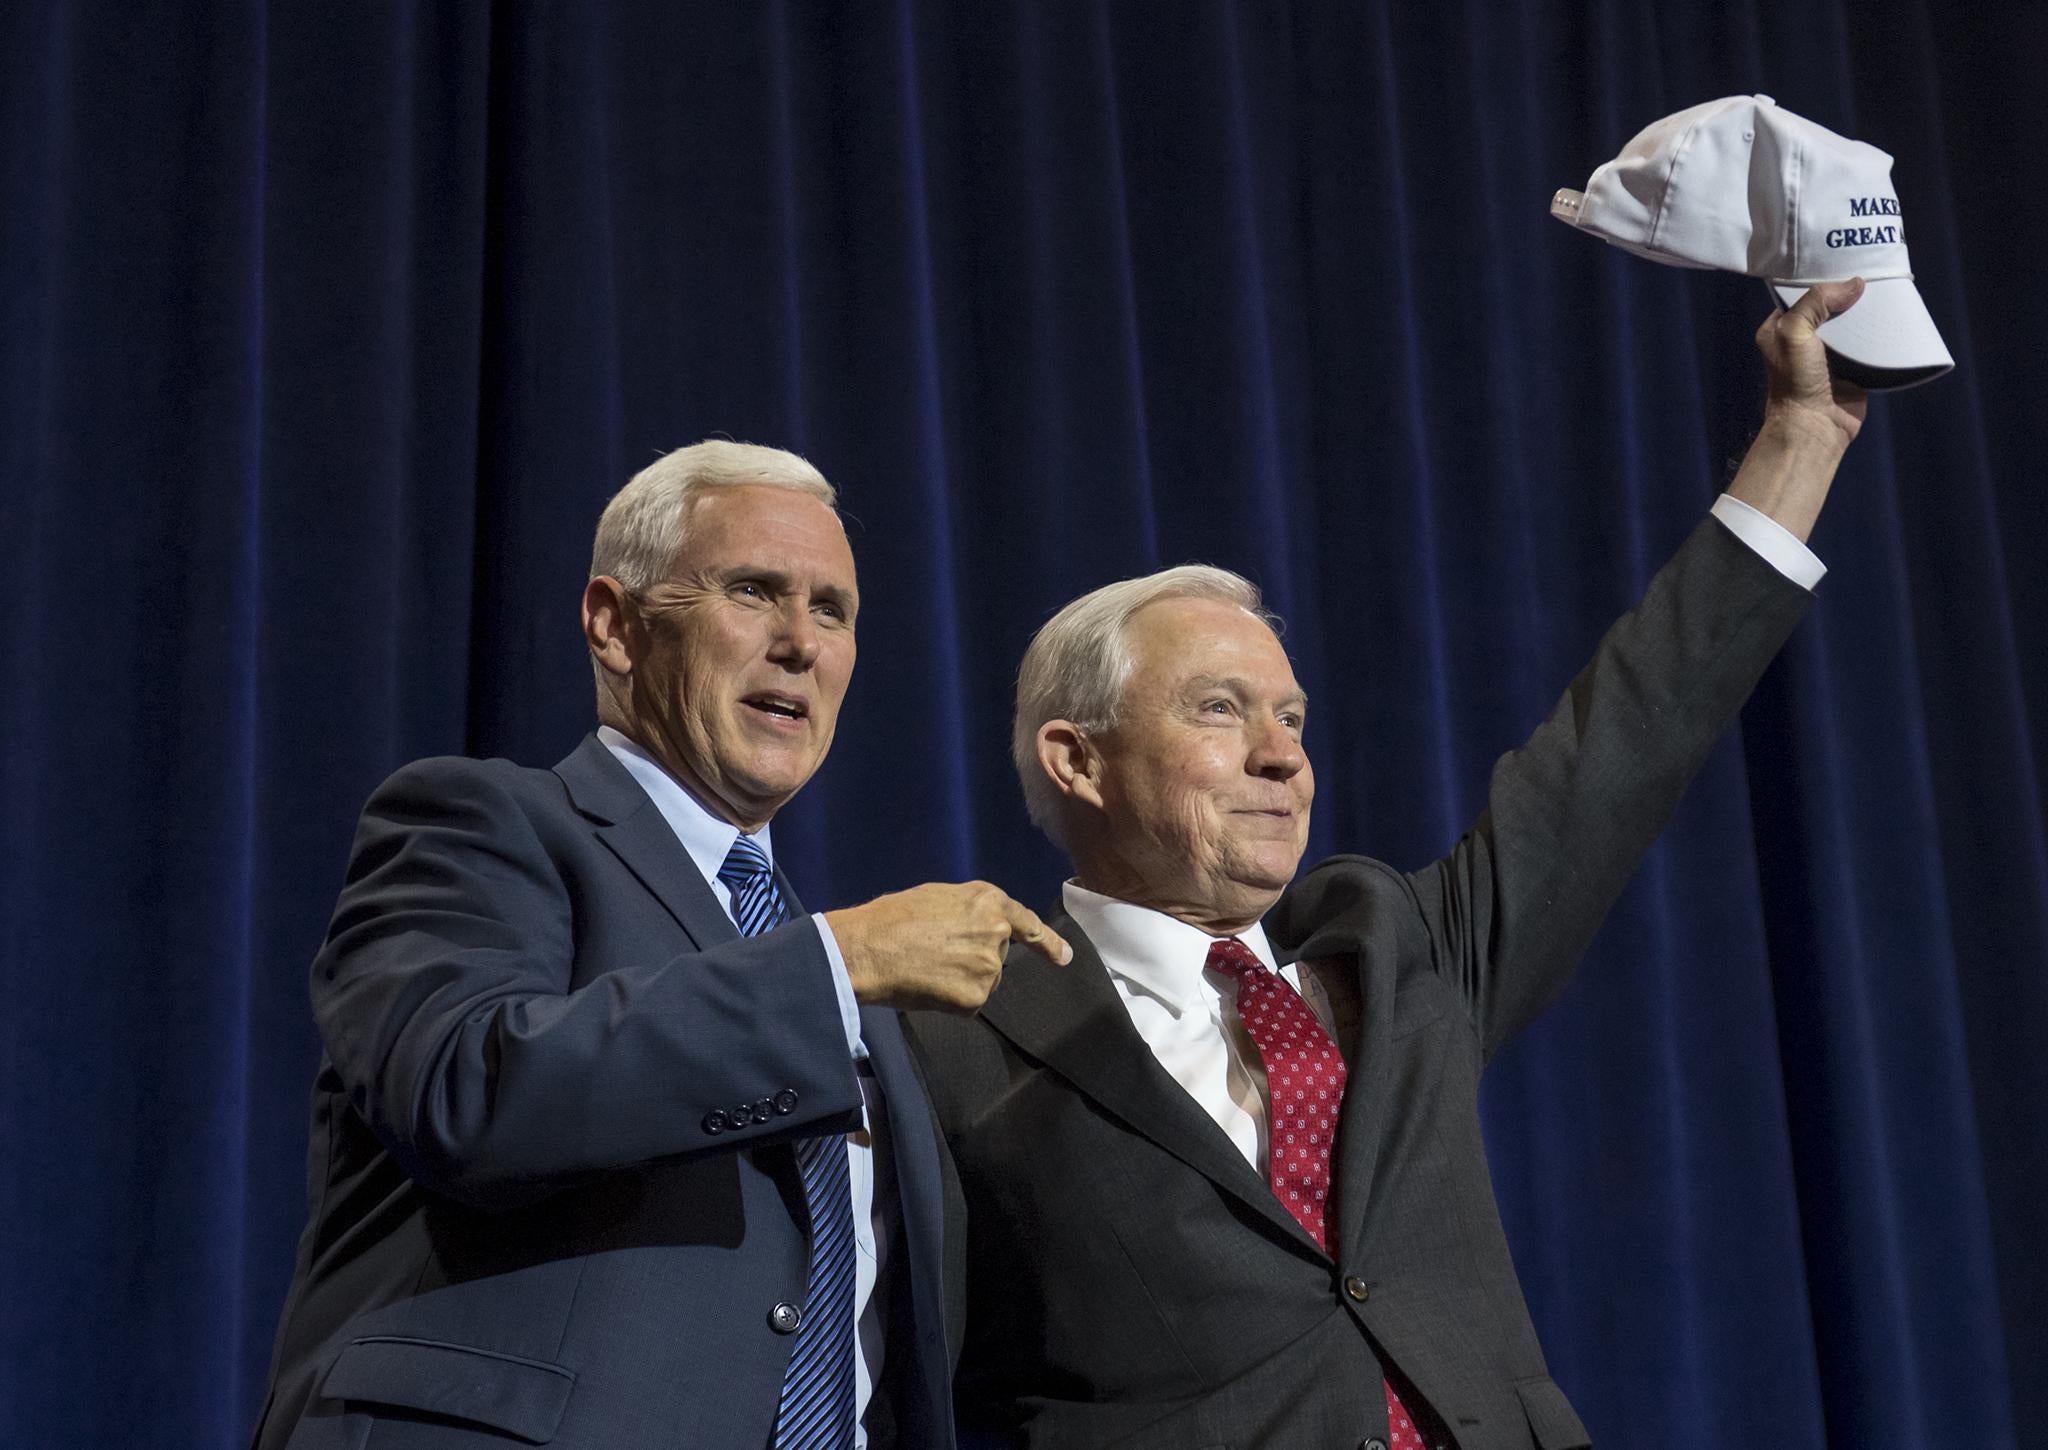 Mike Pence and Jeff Sessions during a campaign event for Donald Trump in Phoenix, Arizona 31 August, 2016